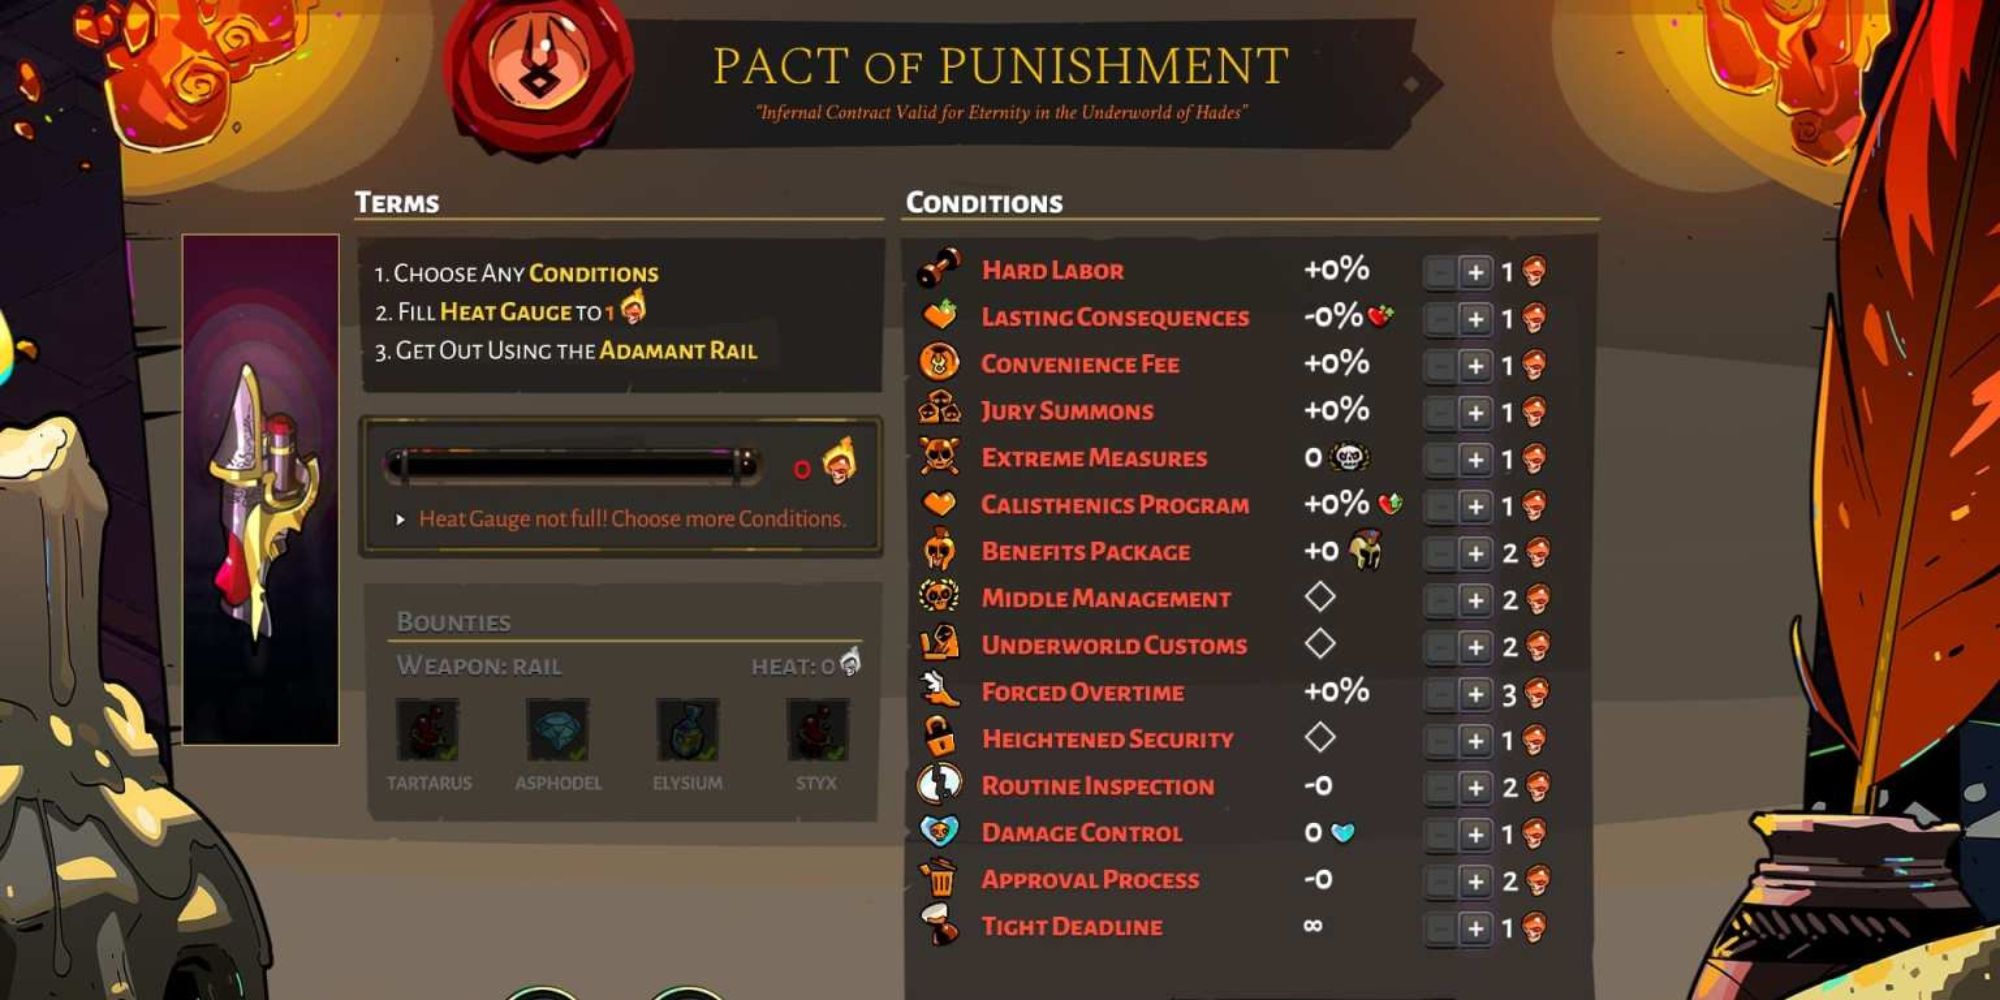 Pact Of Punishment from hades